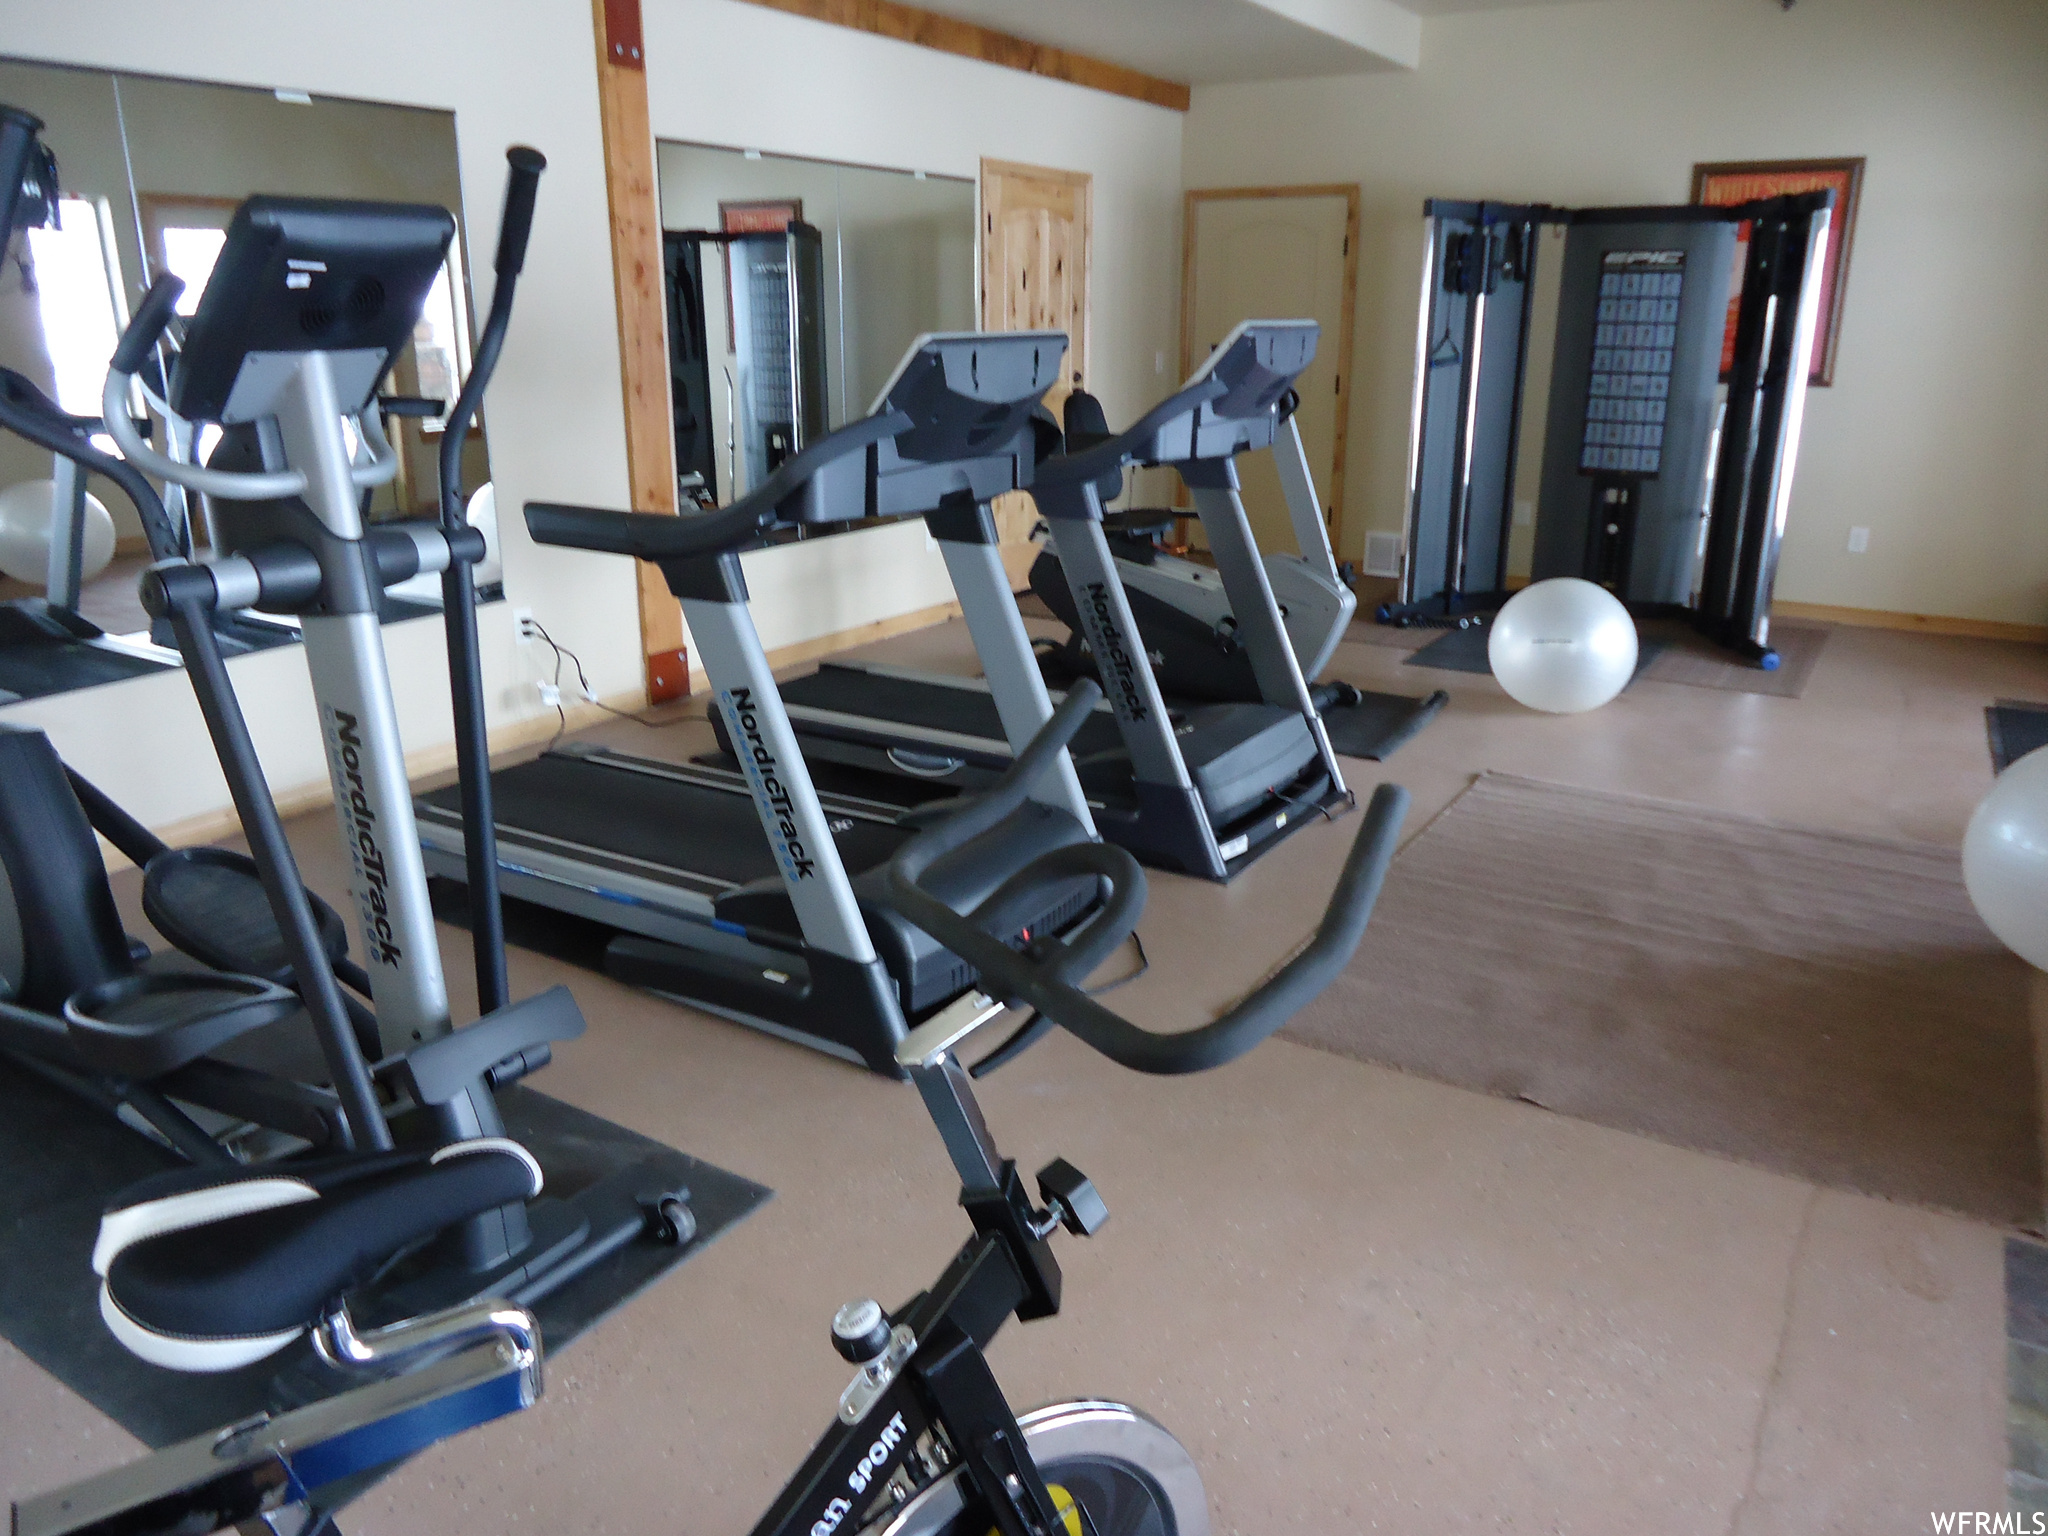 Community Gym: View of workout area